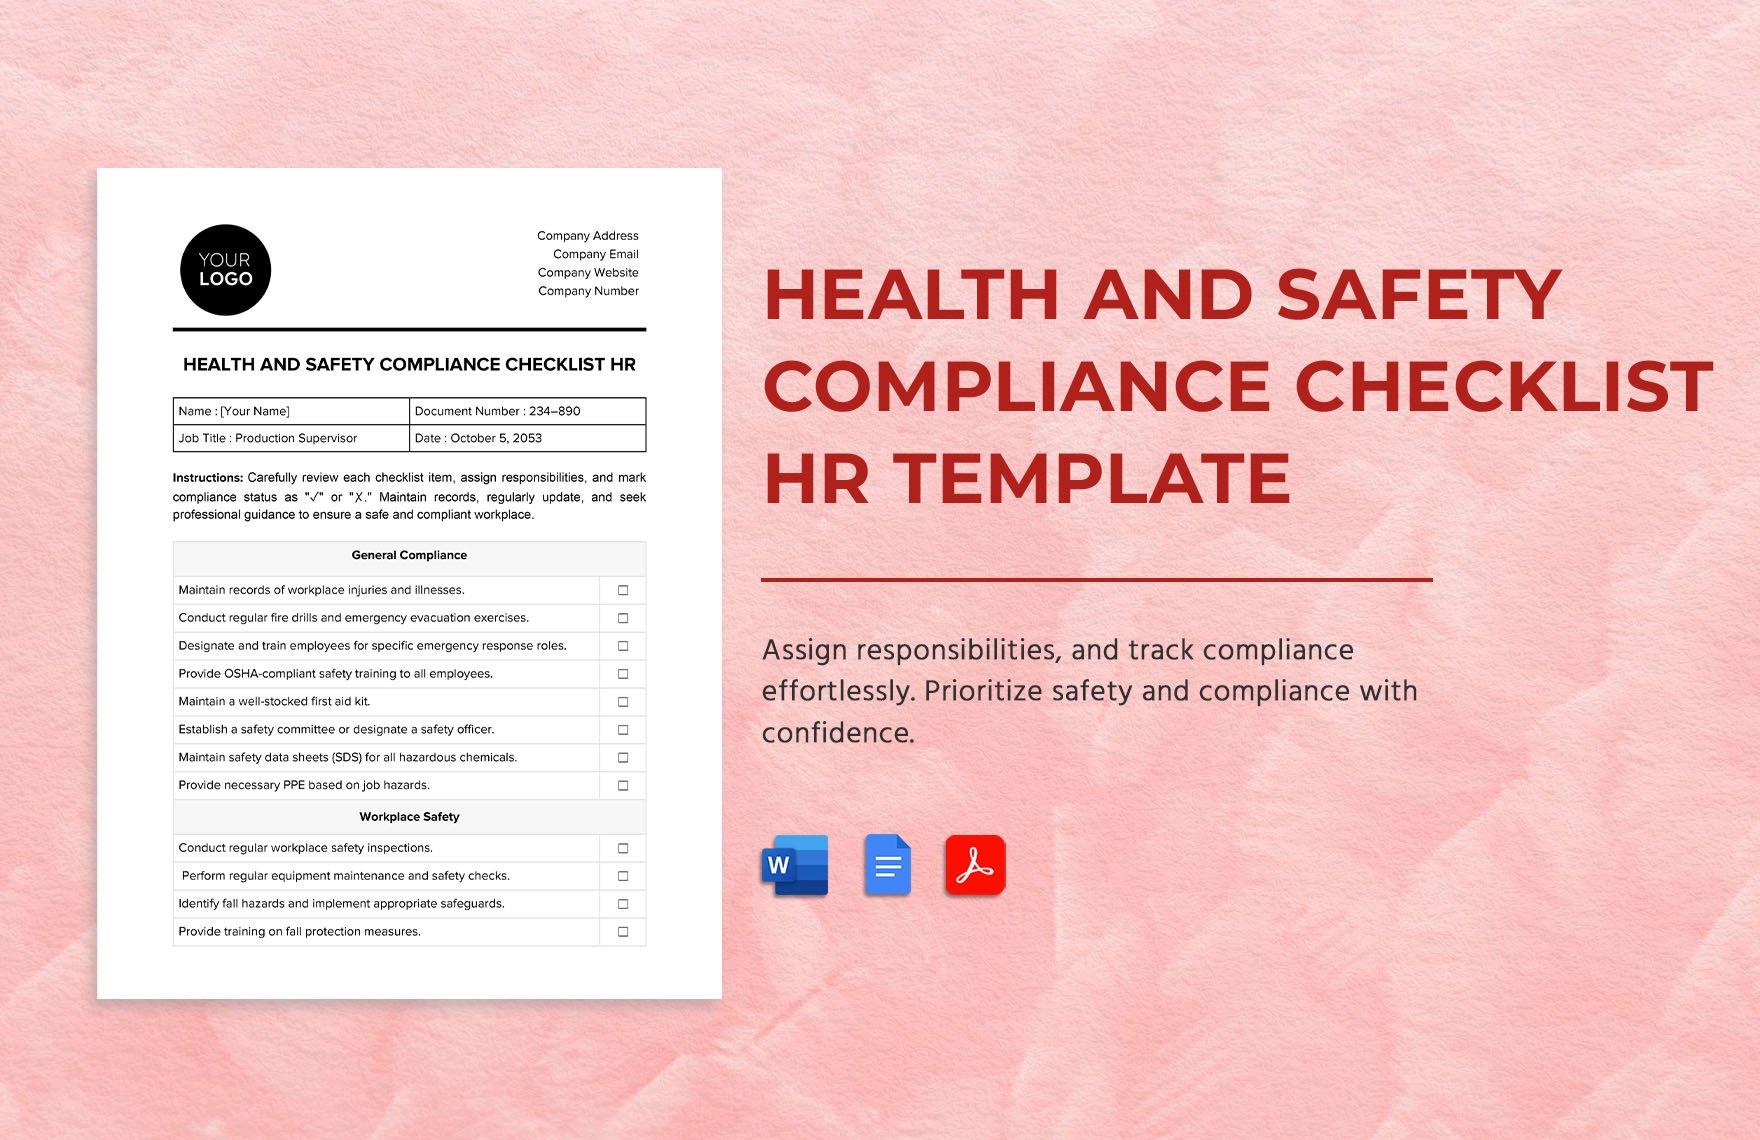 Health and Safety Compliance Checklist HR Template in Word, Google Docs, PDF